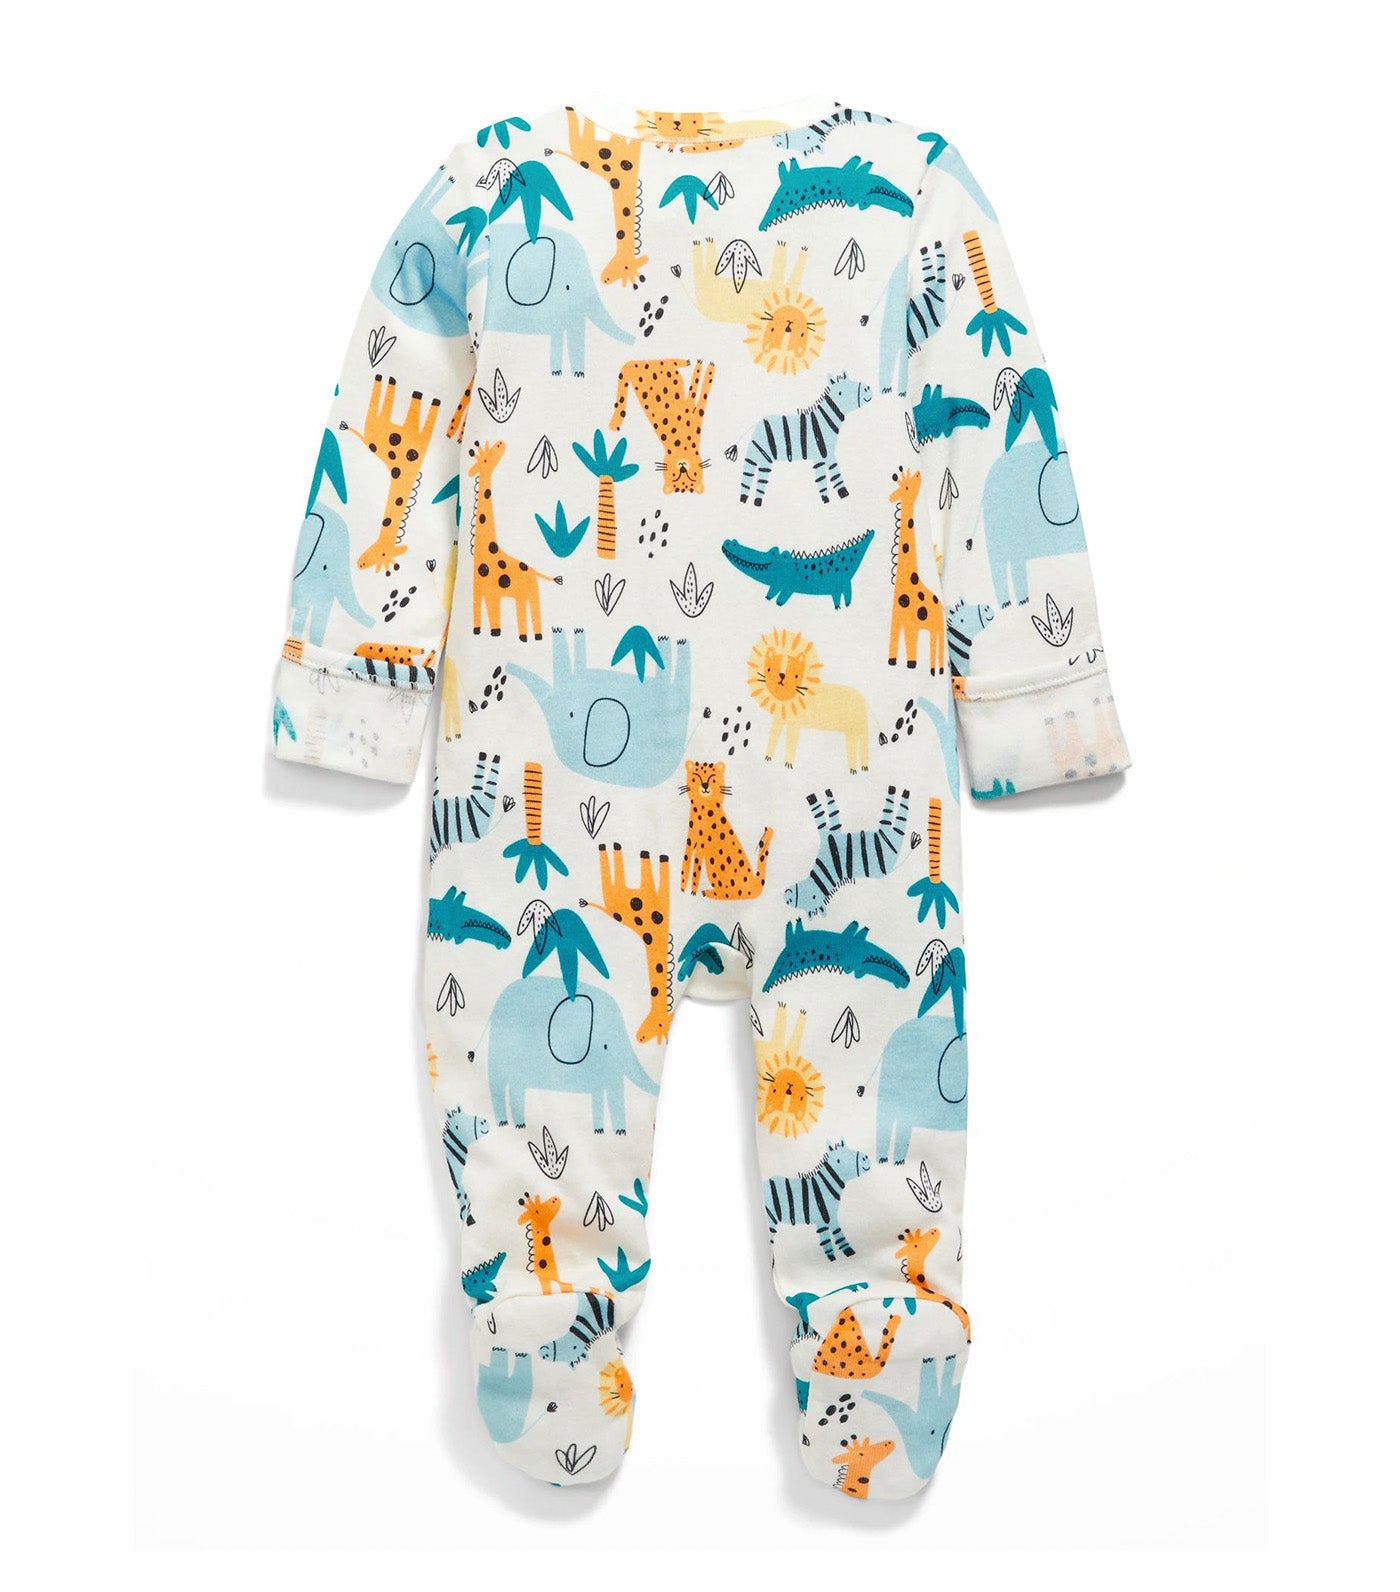 Unisex Sleep & Play 2-Way-Zip Footed One-Piece for Baby - Animals